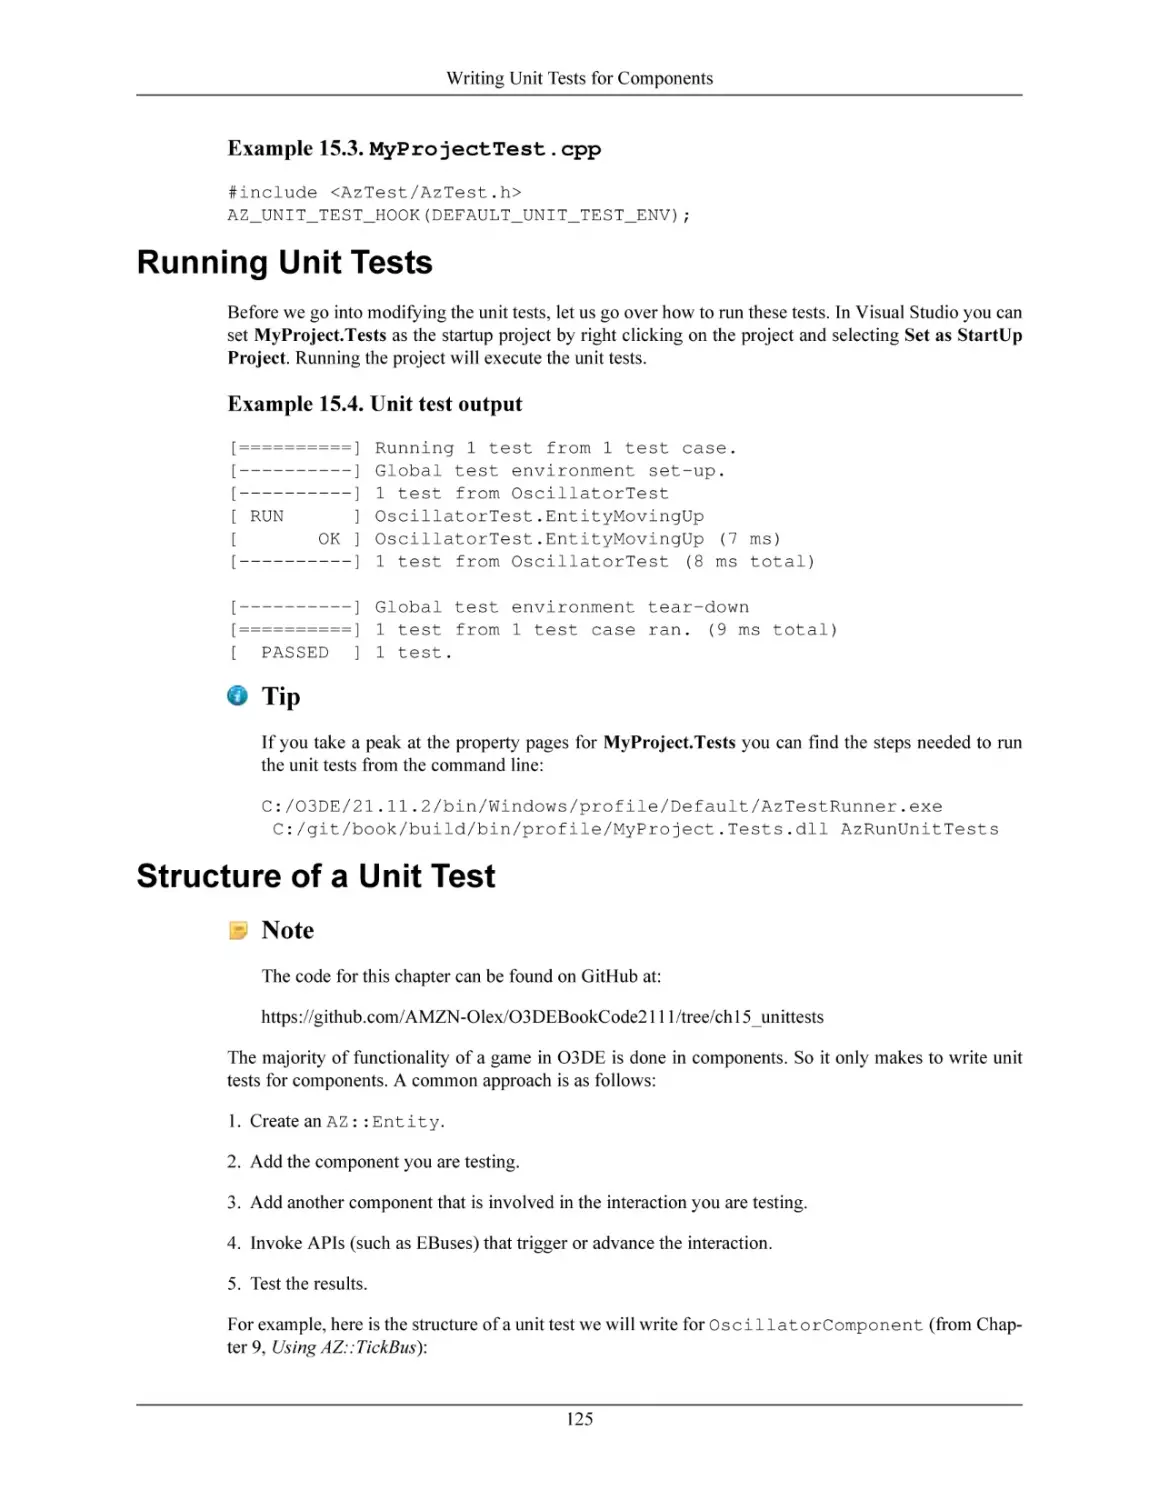 Running Unit Tests
Structure of a Unit Test